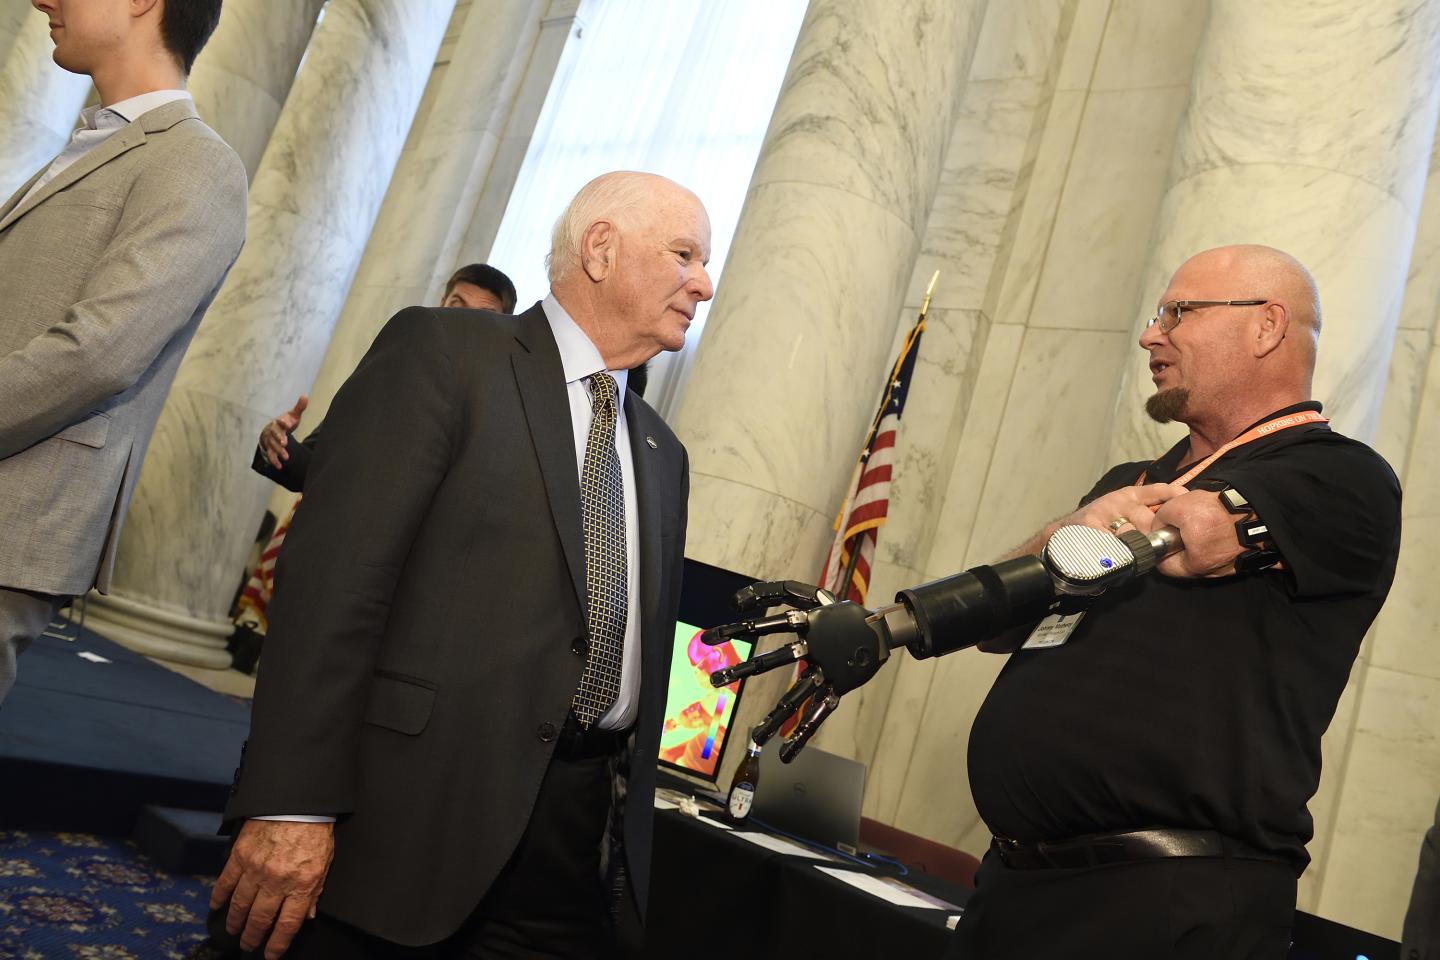 U.S. Sen. Ben Cardin talks with Johnny Matheny, whose prosthetic arm was designed by Johns Hopkins researchers